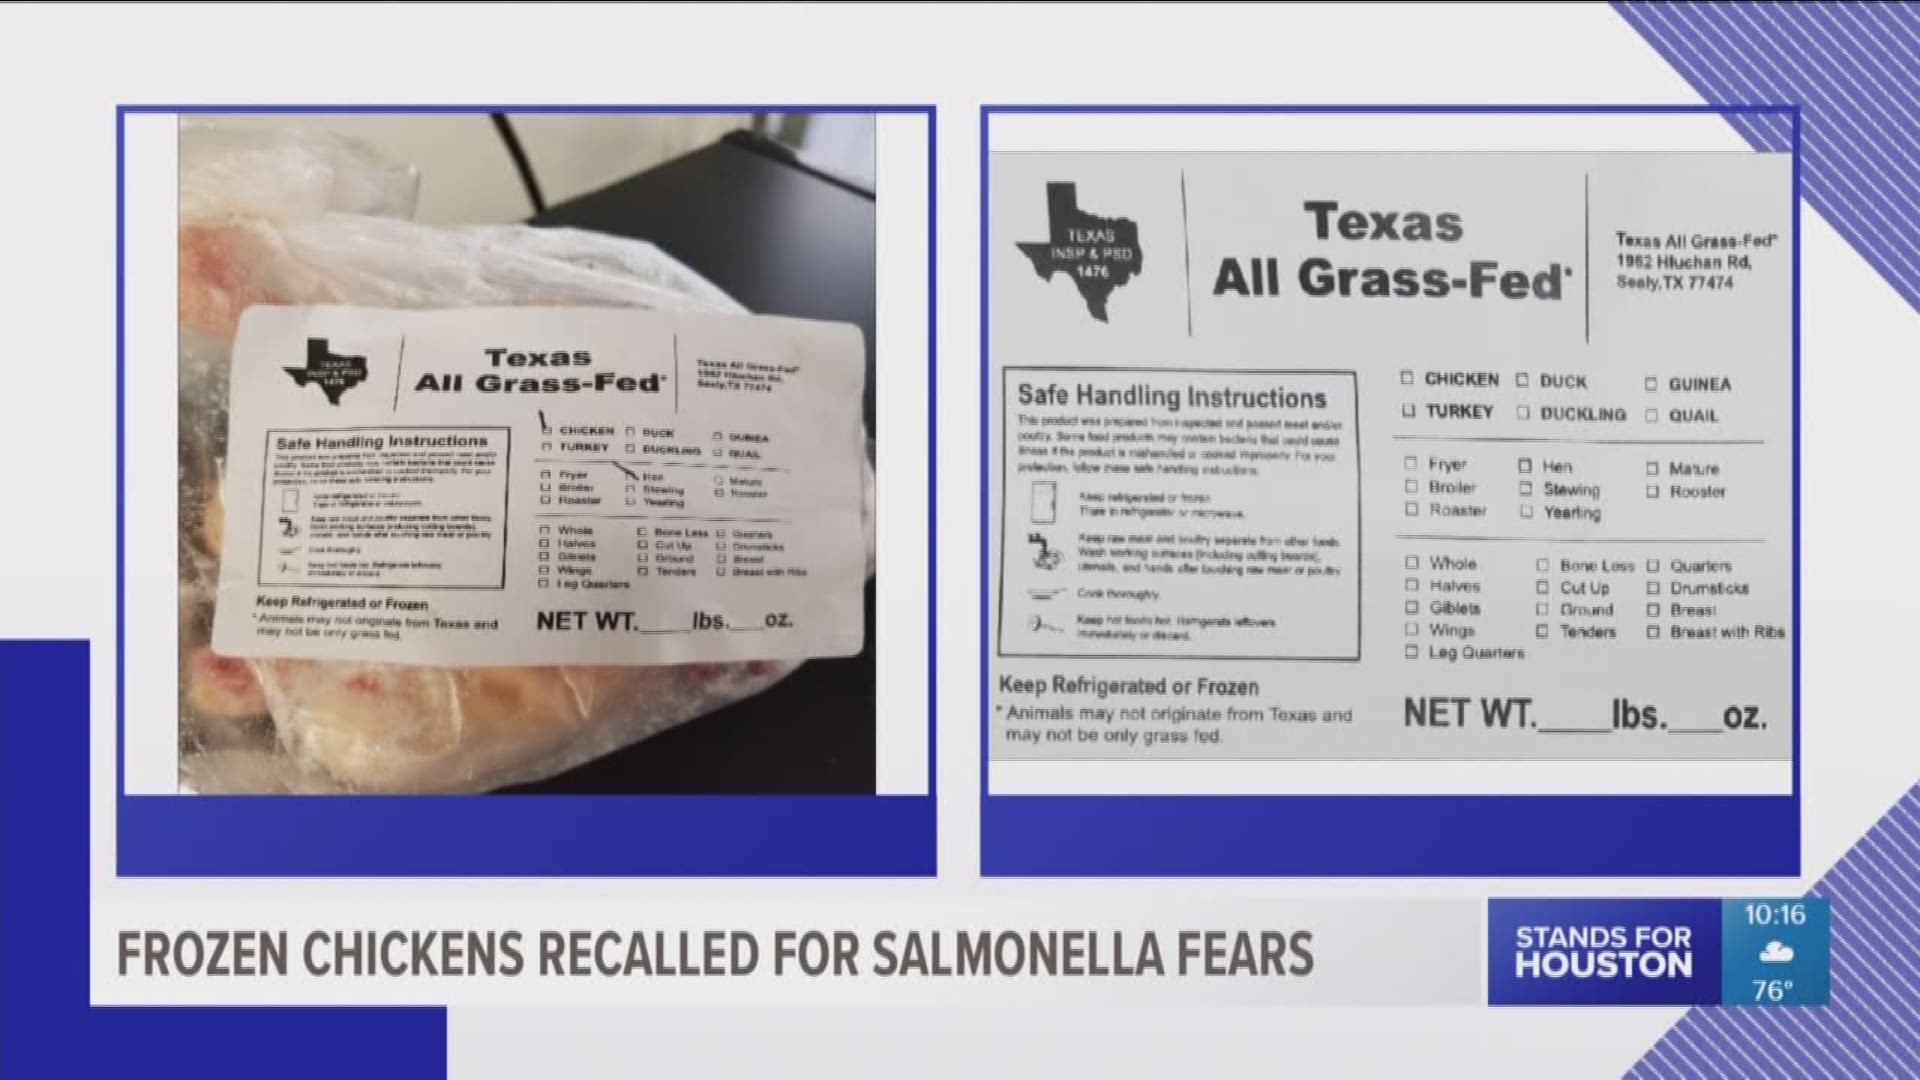 A Sealy firm, Texas All Grass-Fed, recalls 2,300 whole frozen chickens due to possible Salmonella contamination. 